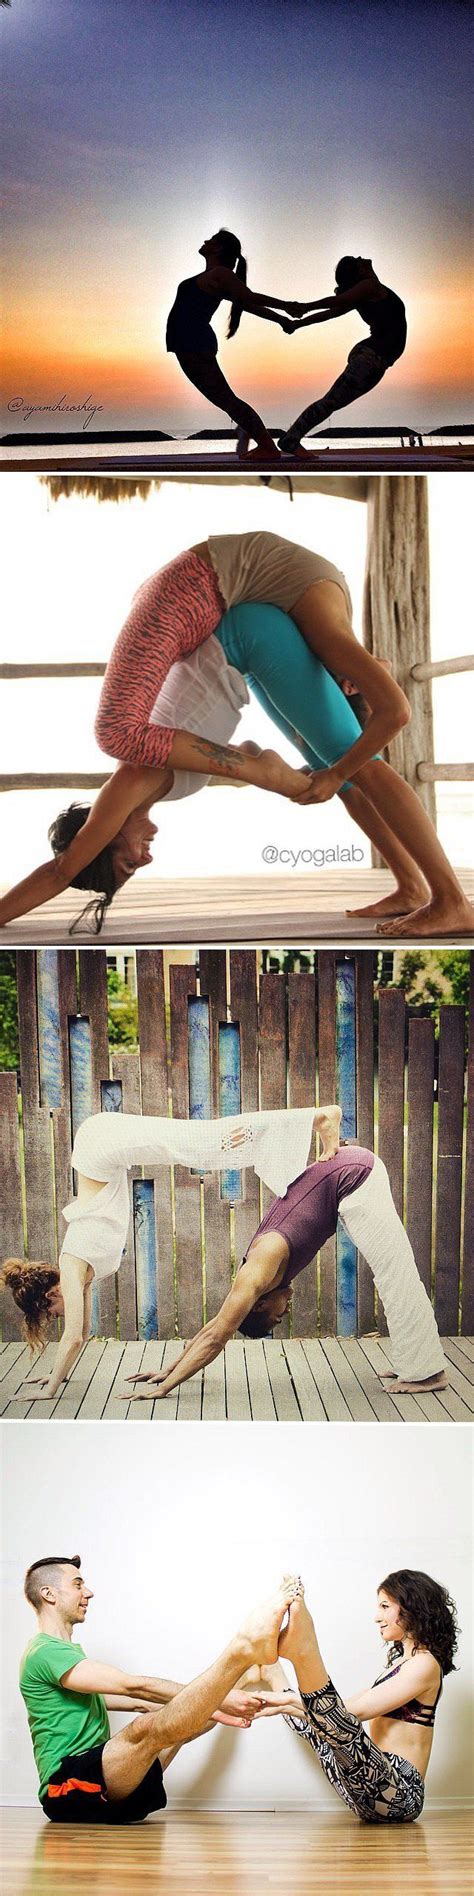 Here are 12 yoga poses for two people that we can practice with our yoga partners relaxation pose is one of the most beautiful couple yoga poses. Partner Yoga Poses For Friends and Lovers | Partner yoga poses, Partner yoga, Couples yoga